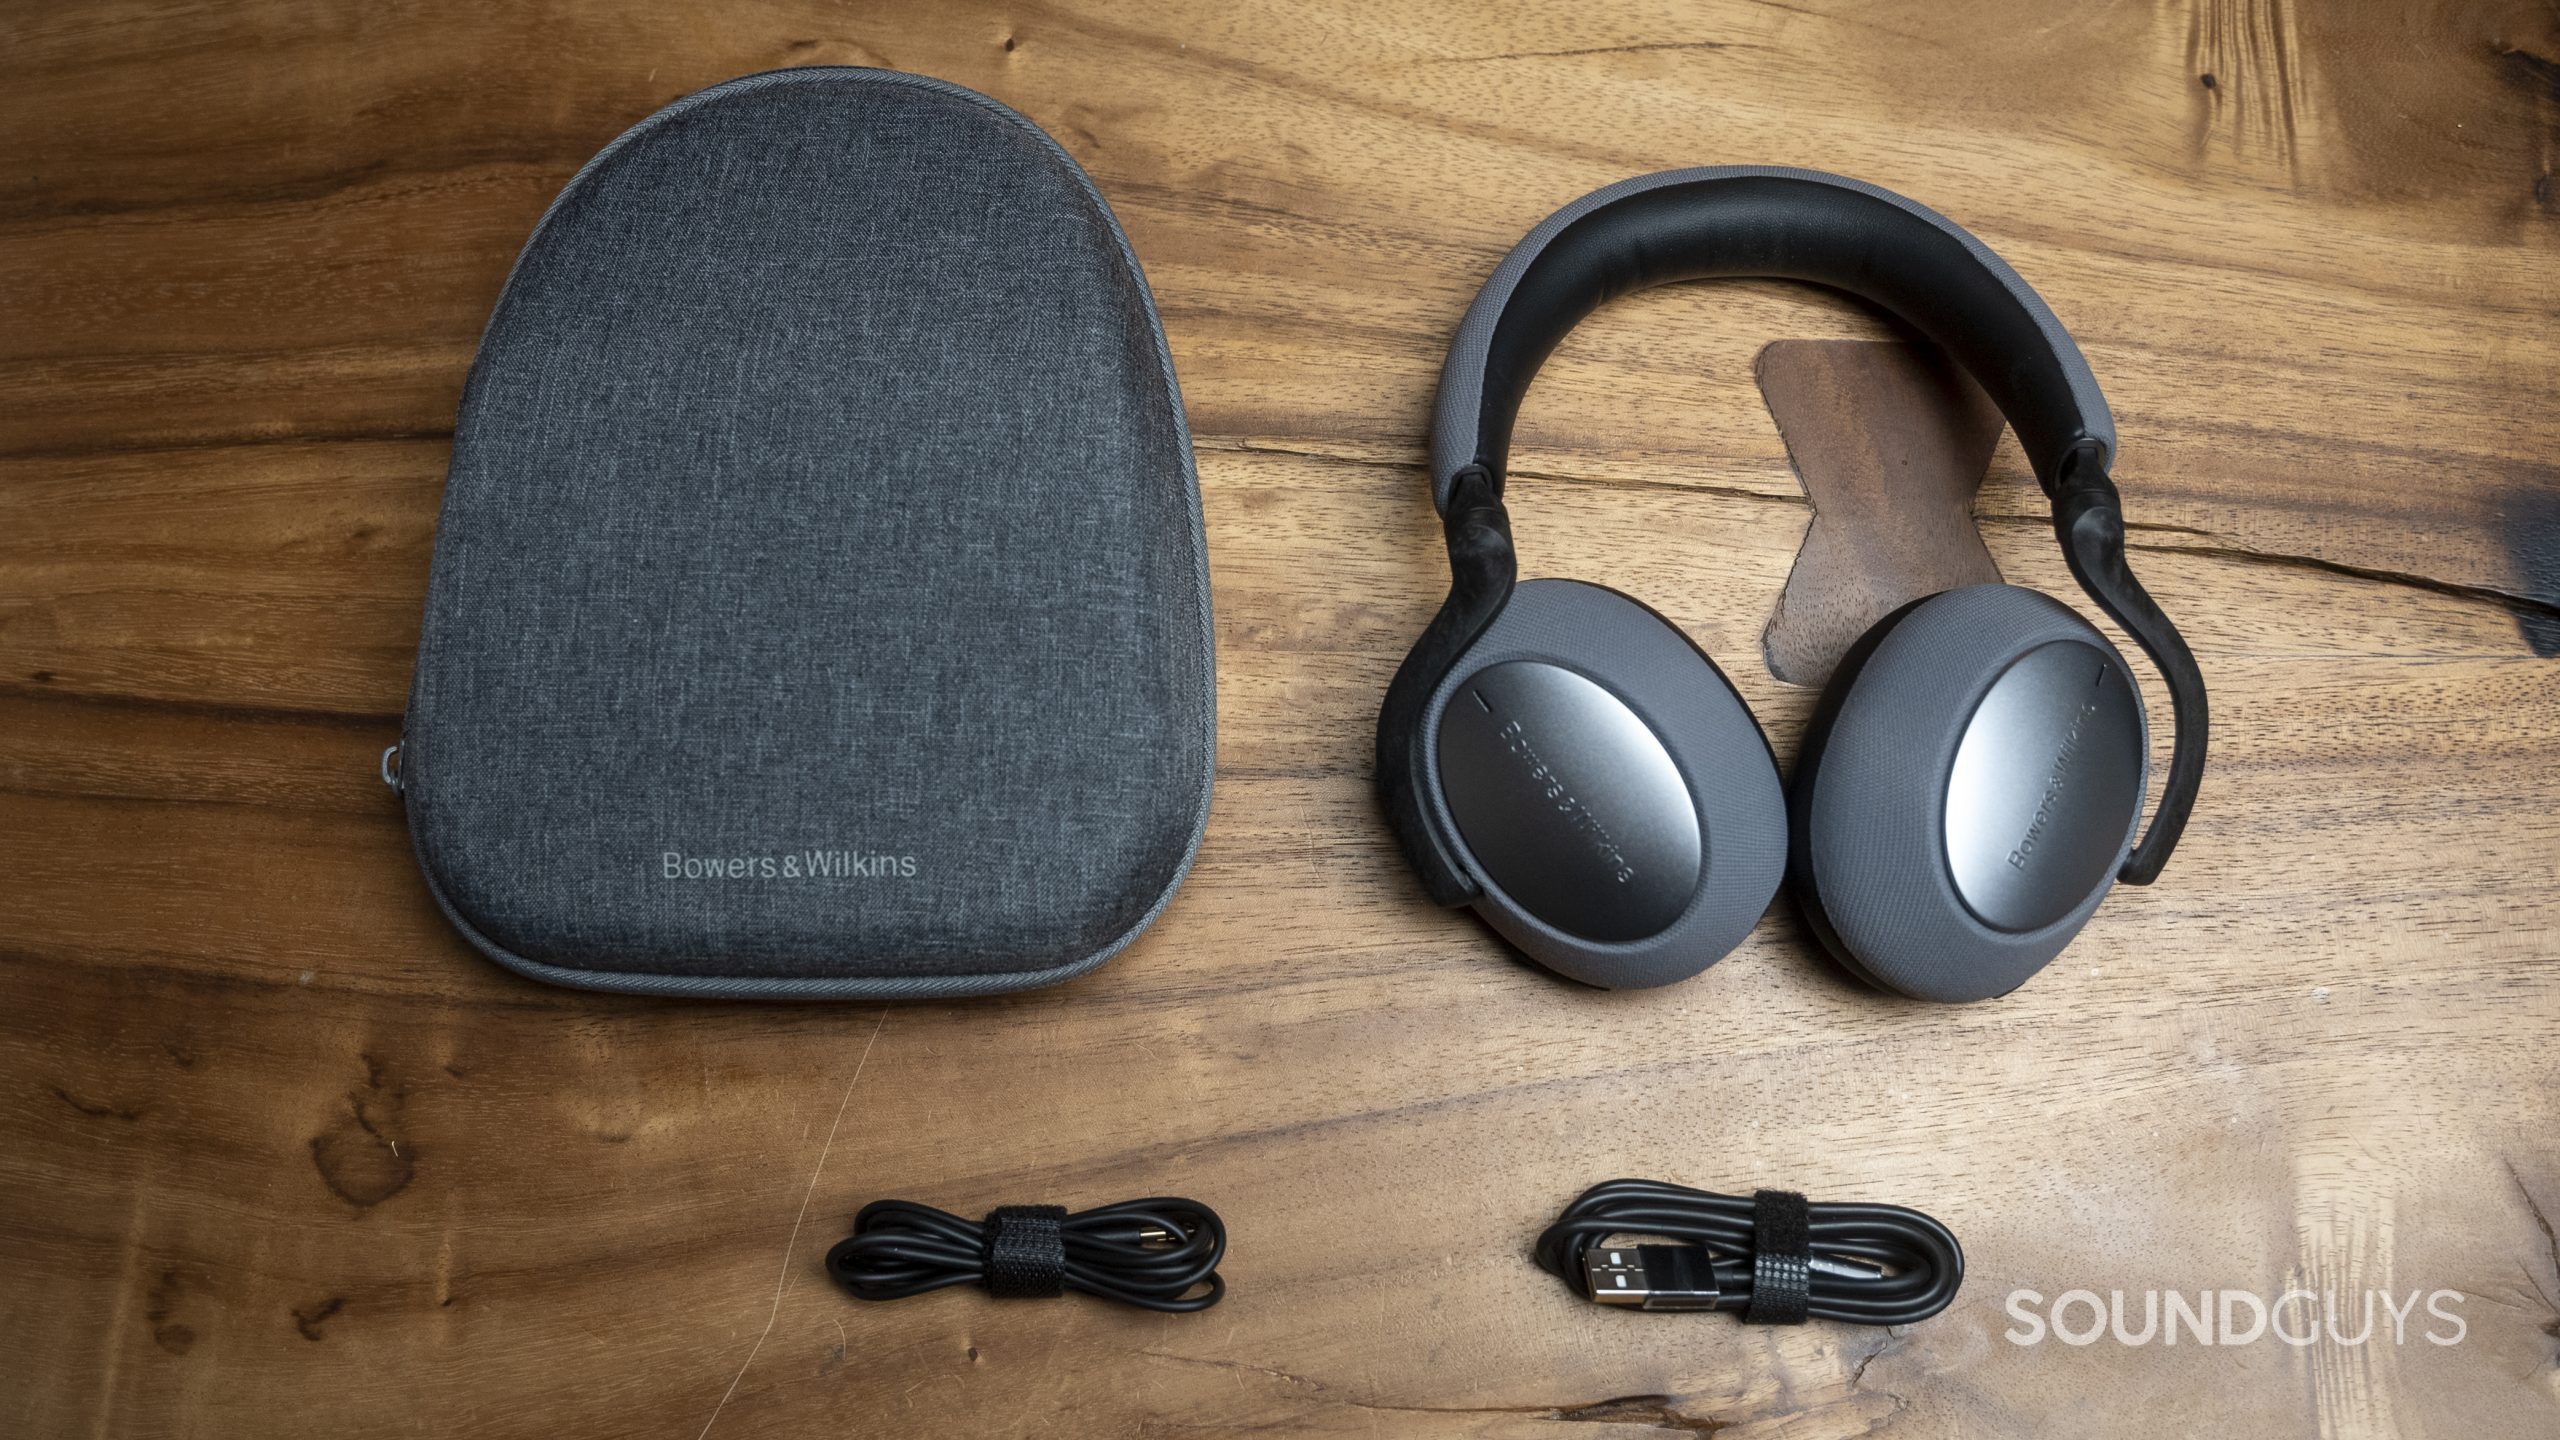 The Bowers &amp; Wilkins PX7 sitting on a wooden table, with the case, headphones, USB-C cable, and 3.5mm cable visible.